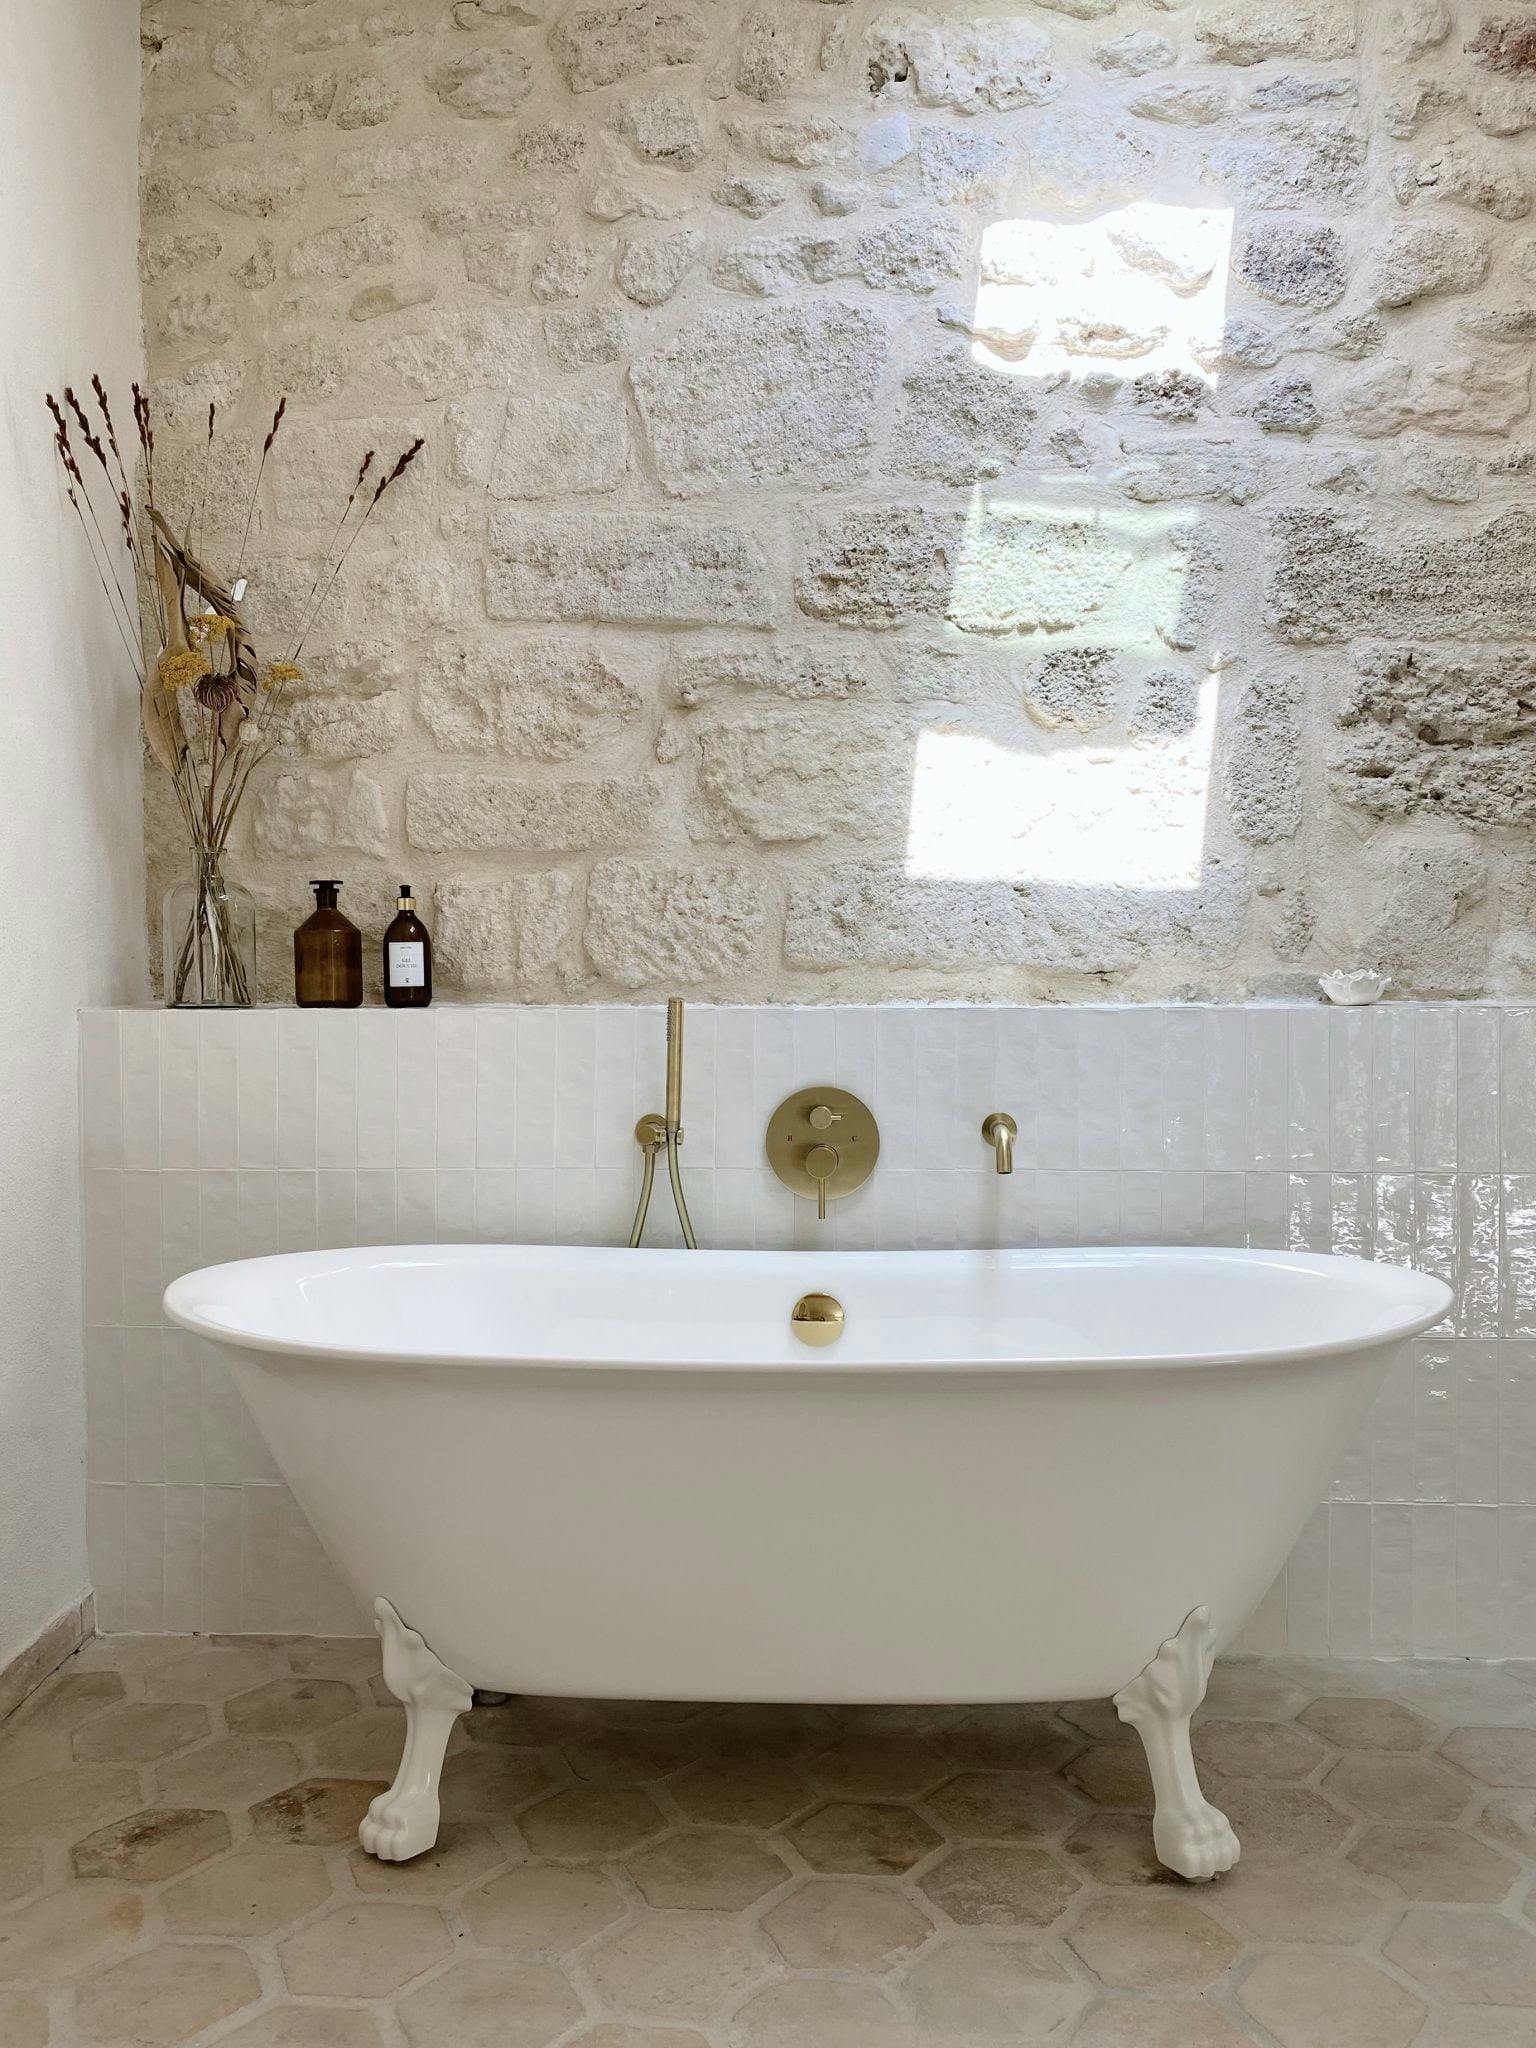 Free-standing bathtub in front of a half-height tiled wall and a stone wall